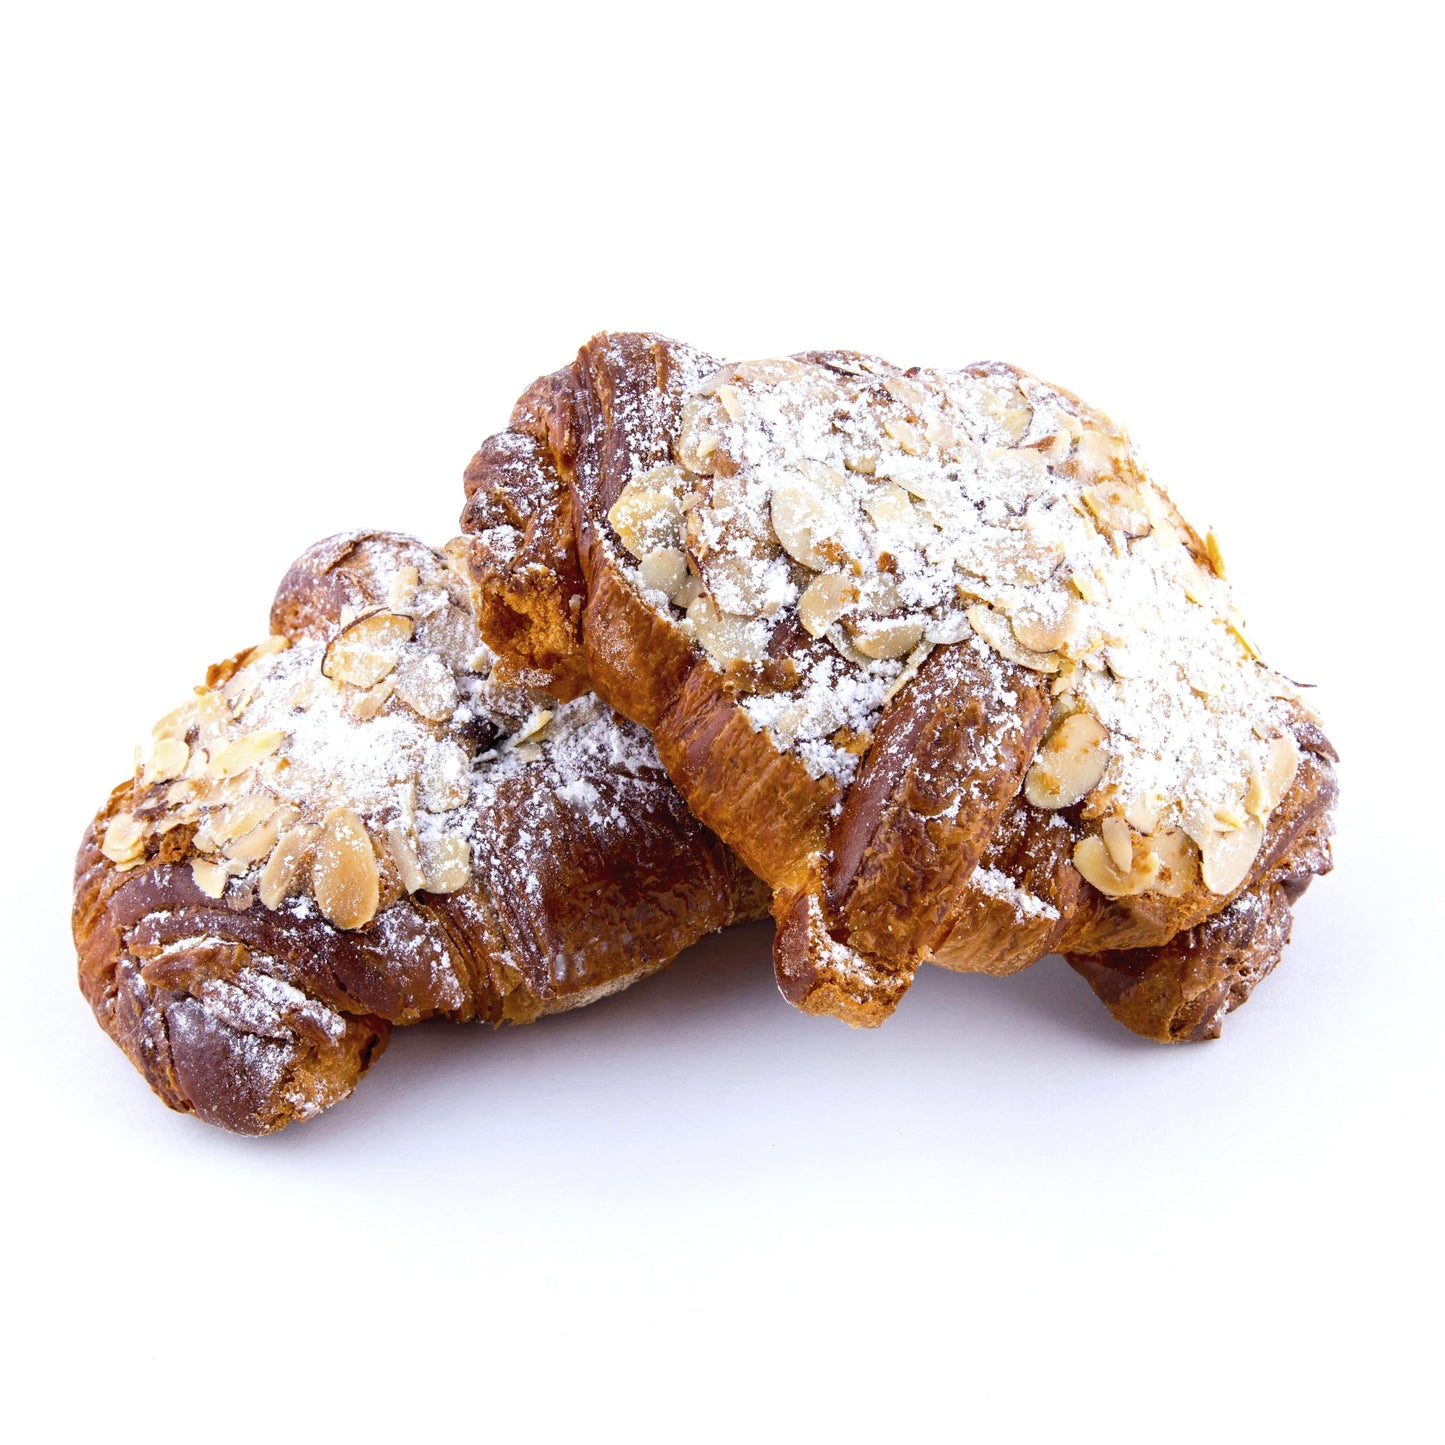 Almond Croissant bake fresh delivery online bakery